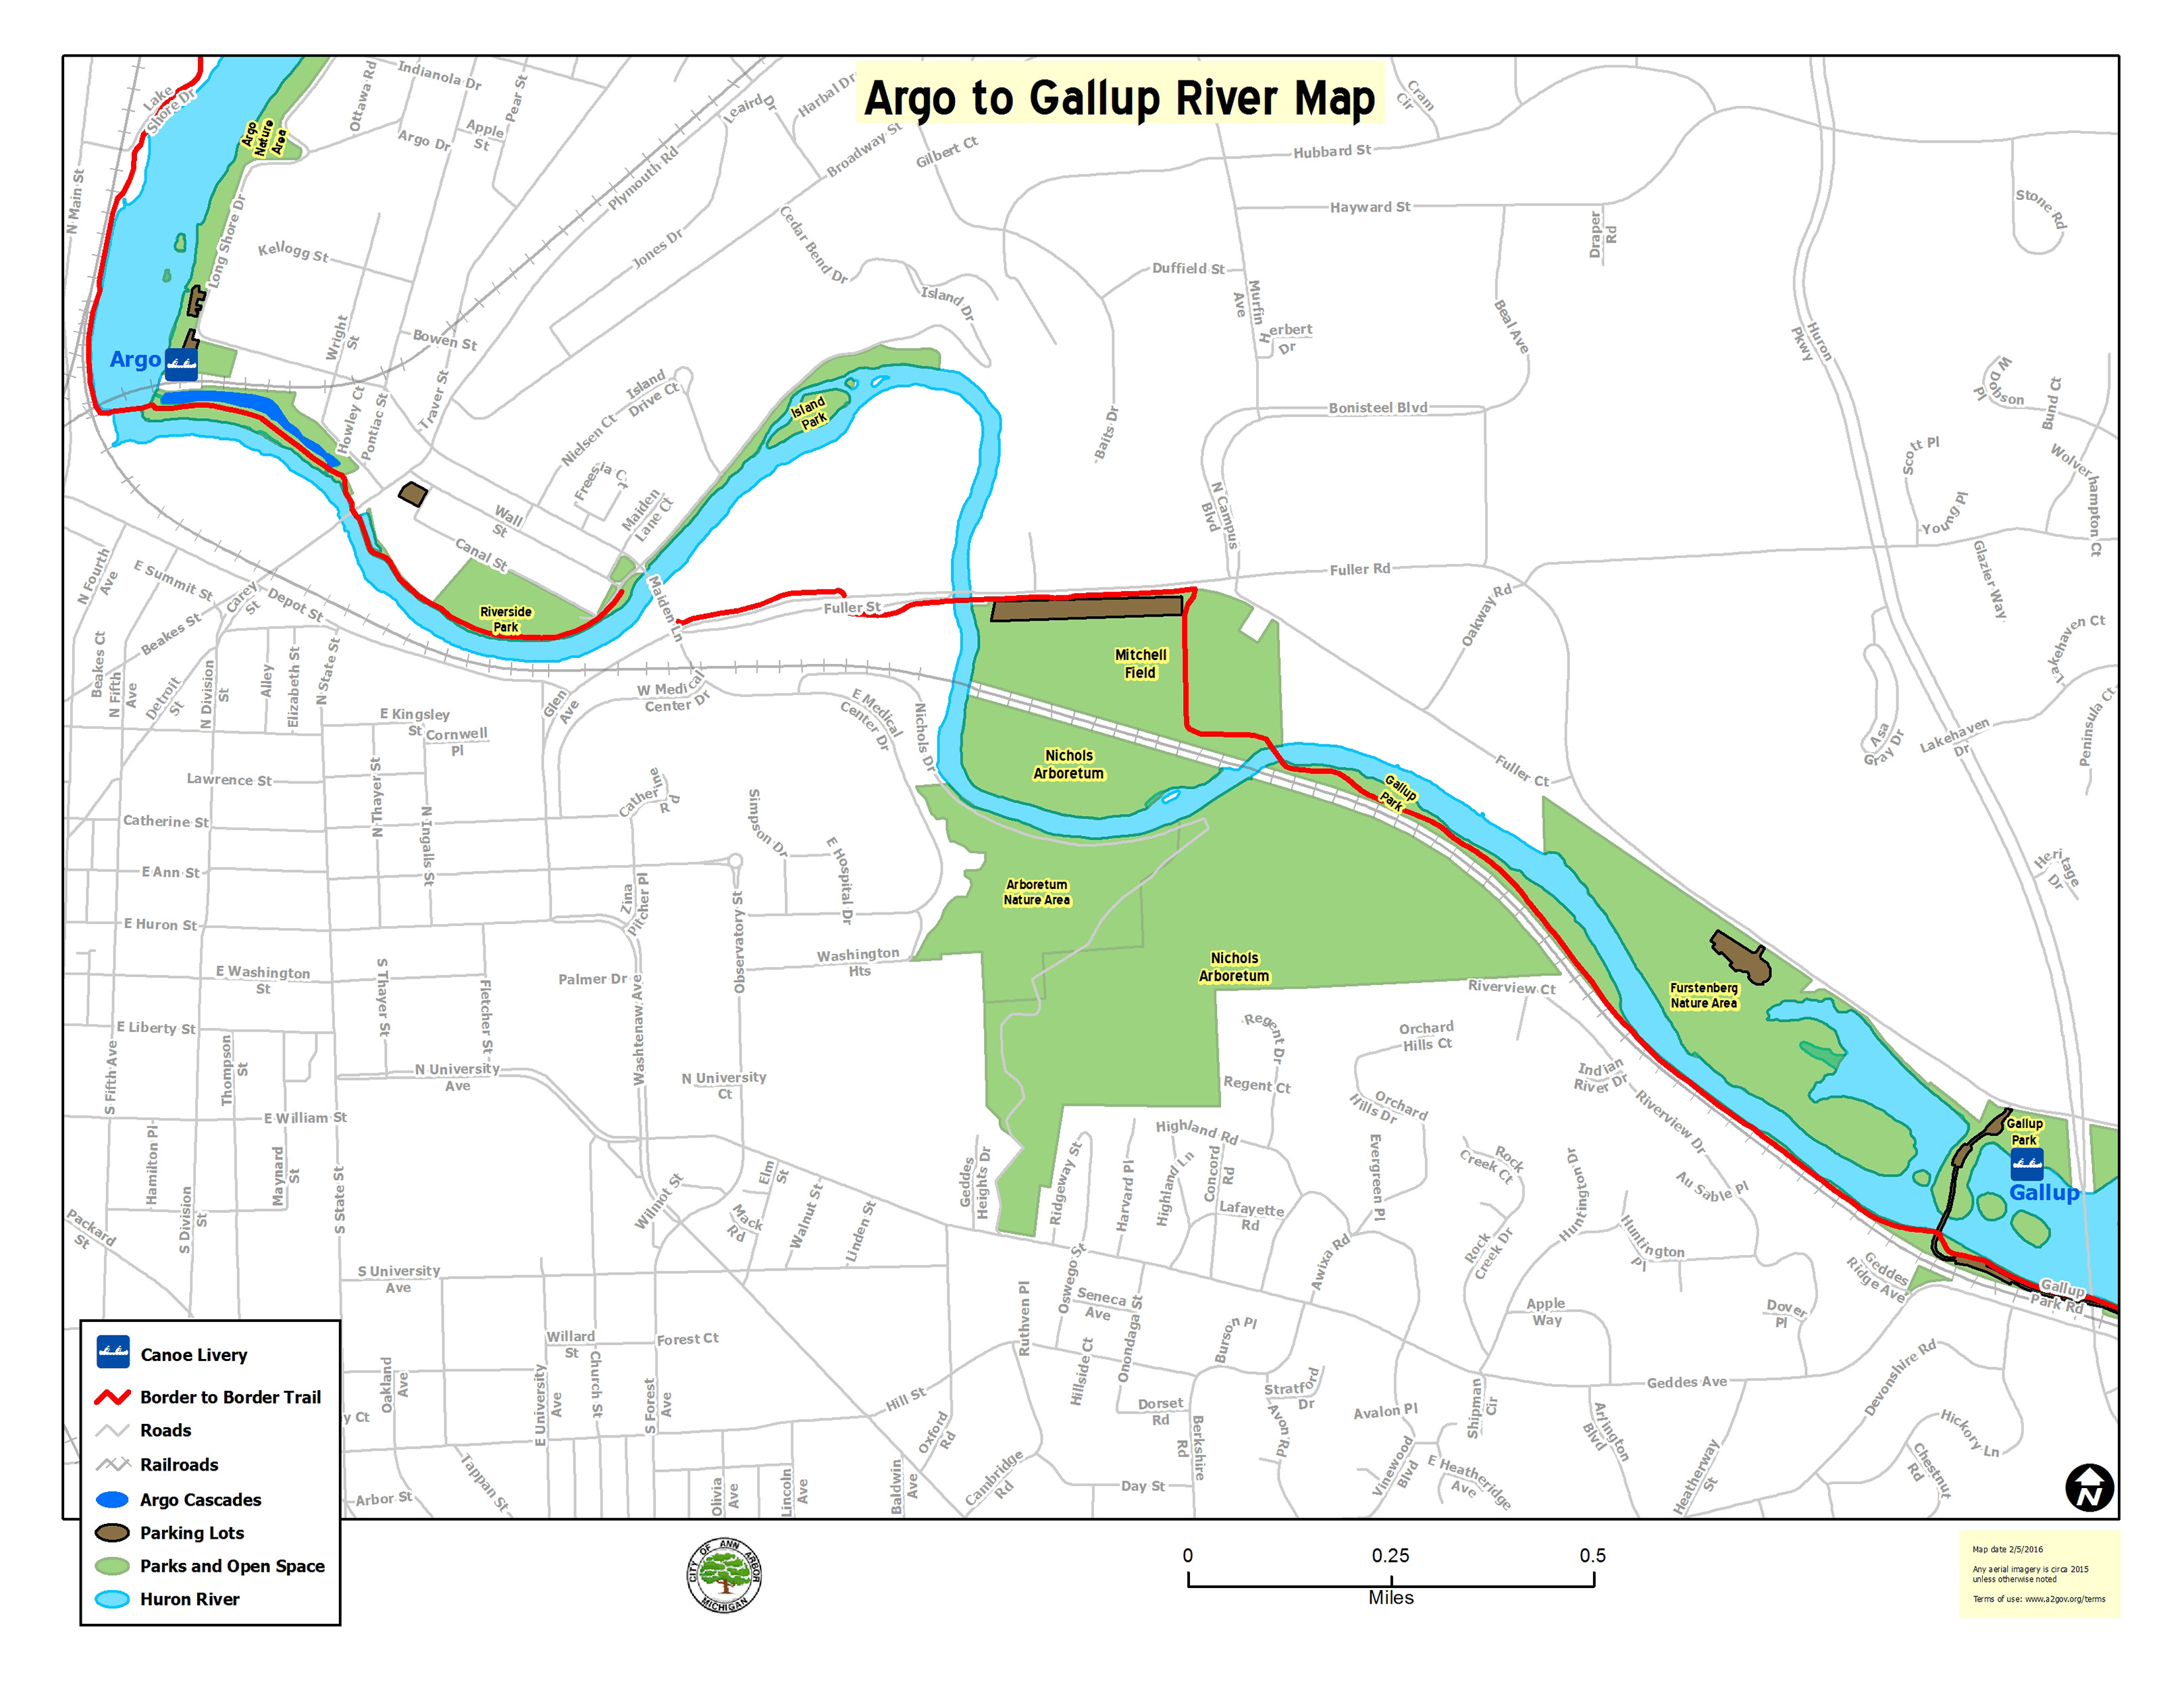 Argo to Gallup River Map.jpg